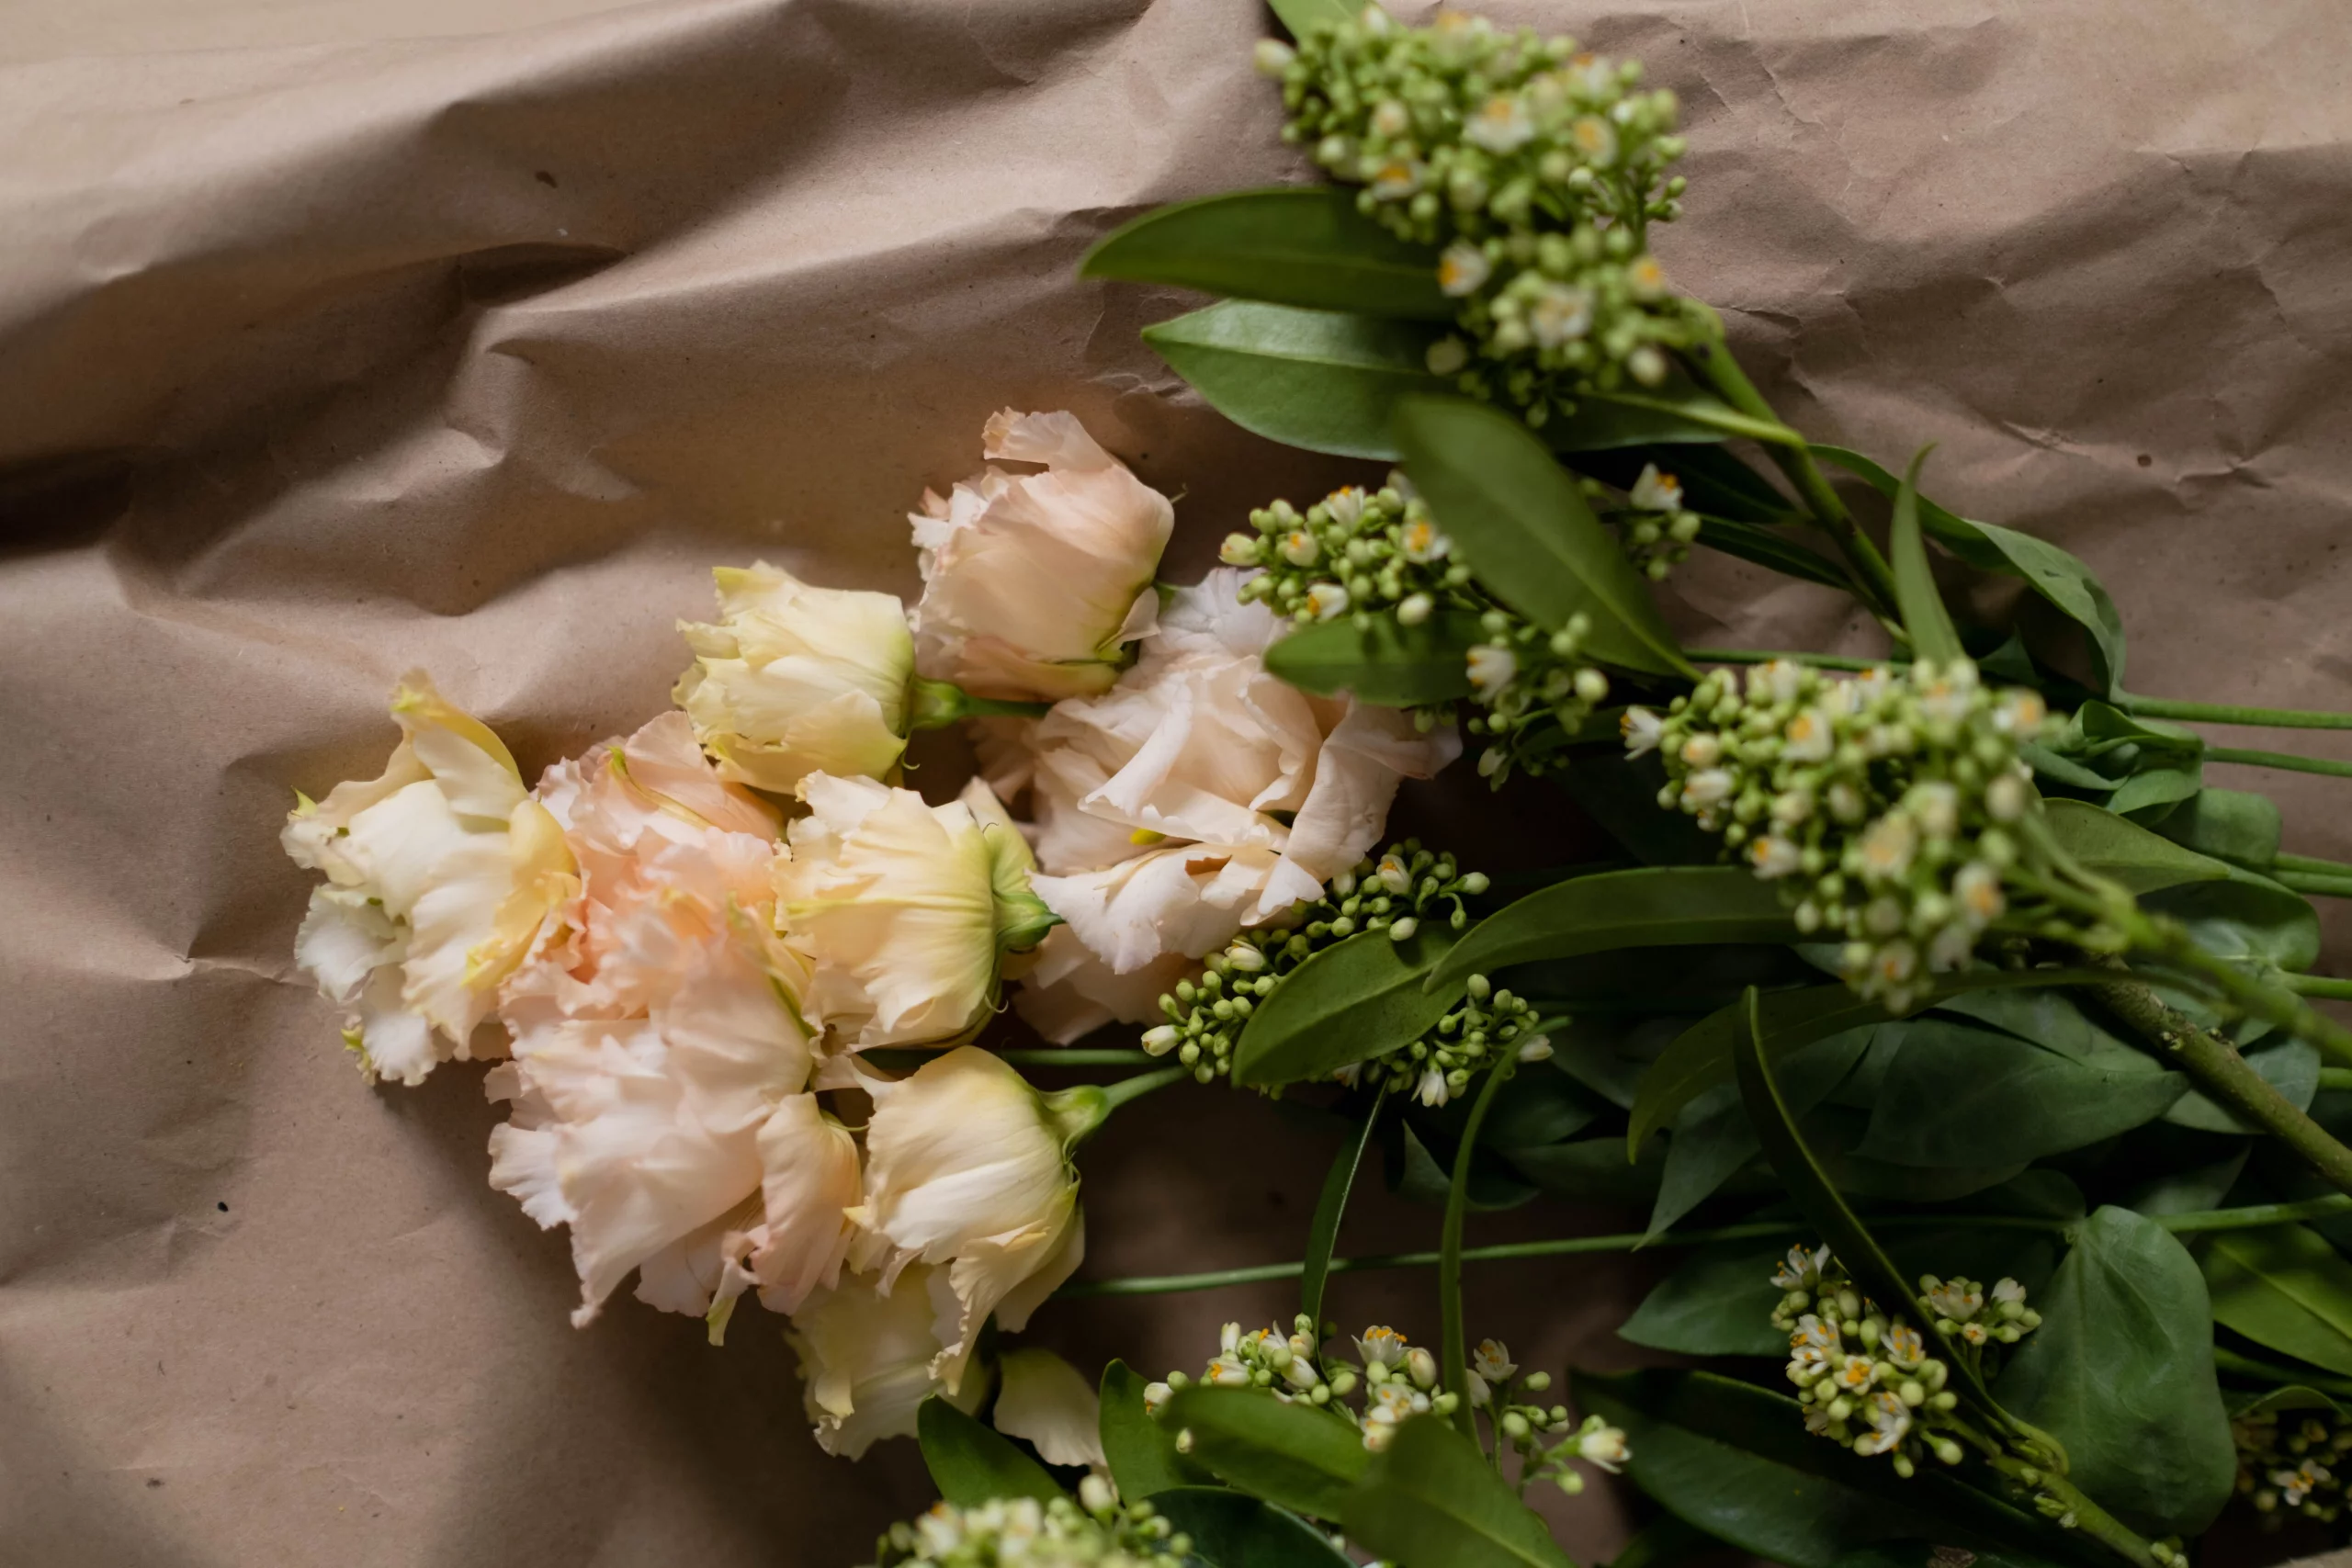 How to Dry and Preserve Flowers